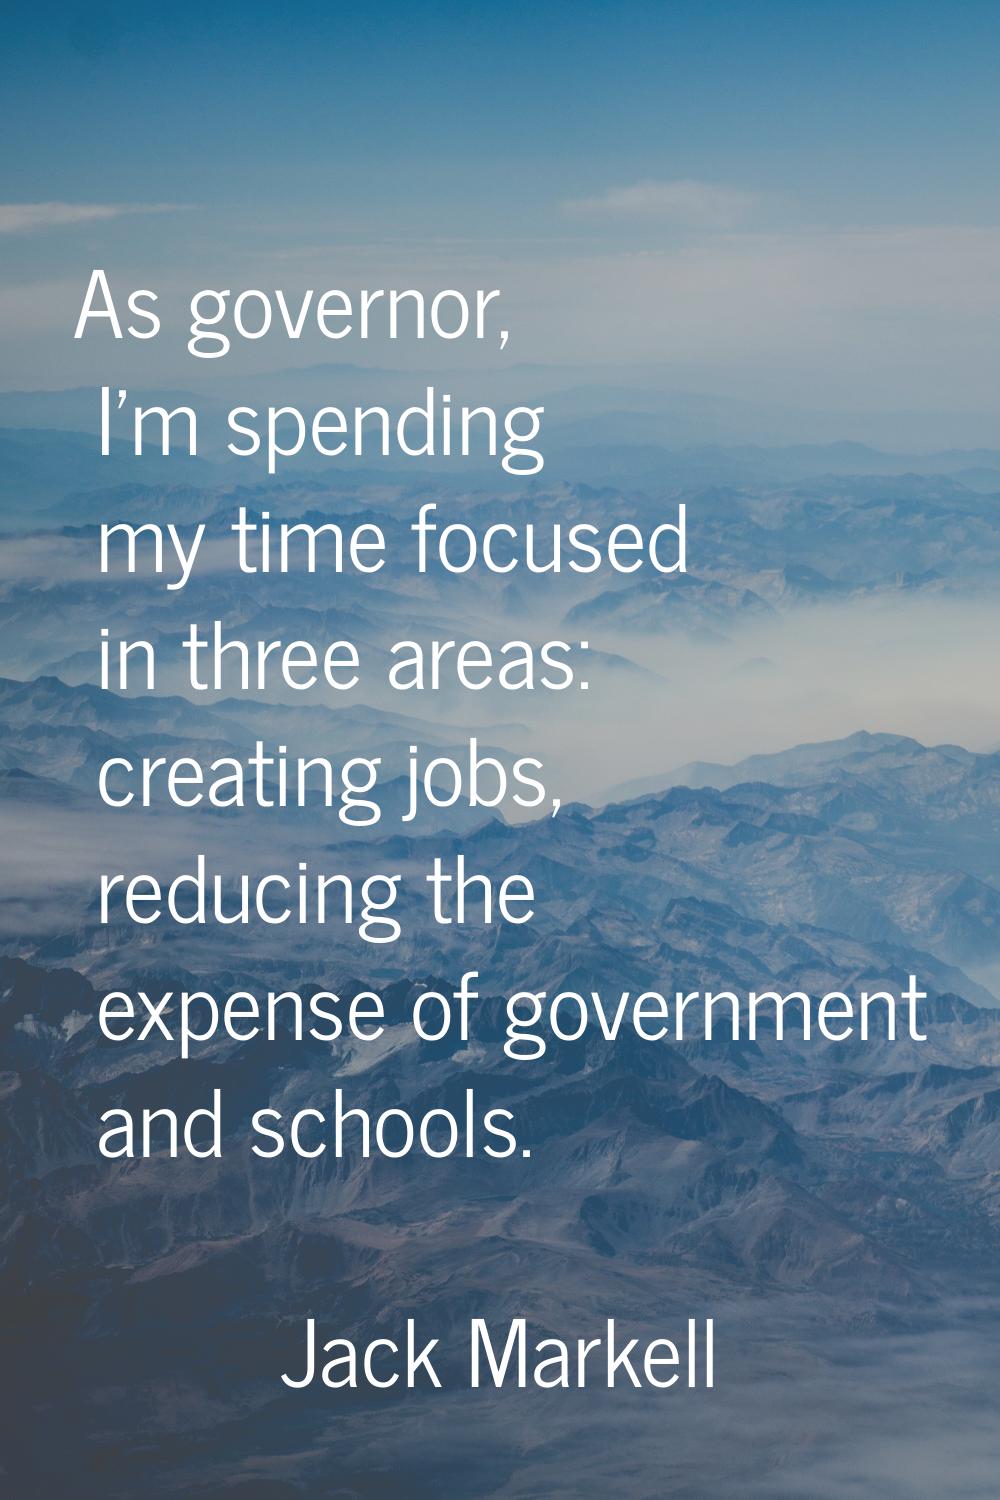 As governor, I'm spending my time focused in three areas: creating jobs, reducing the expense of go